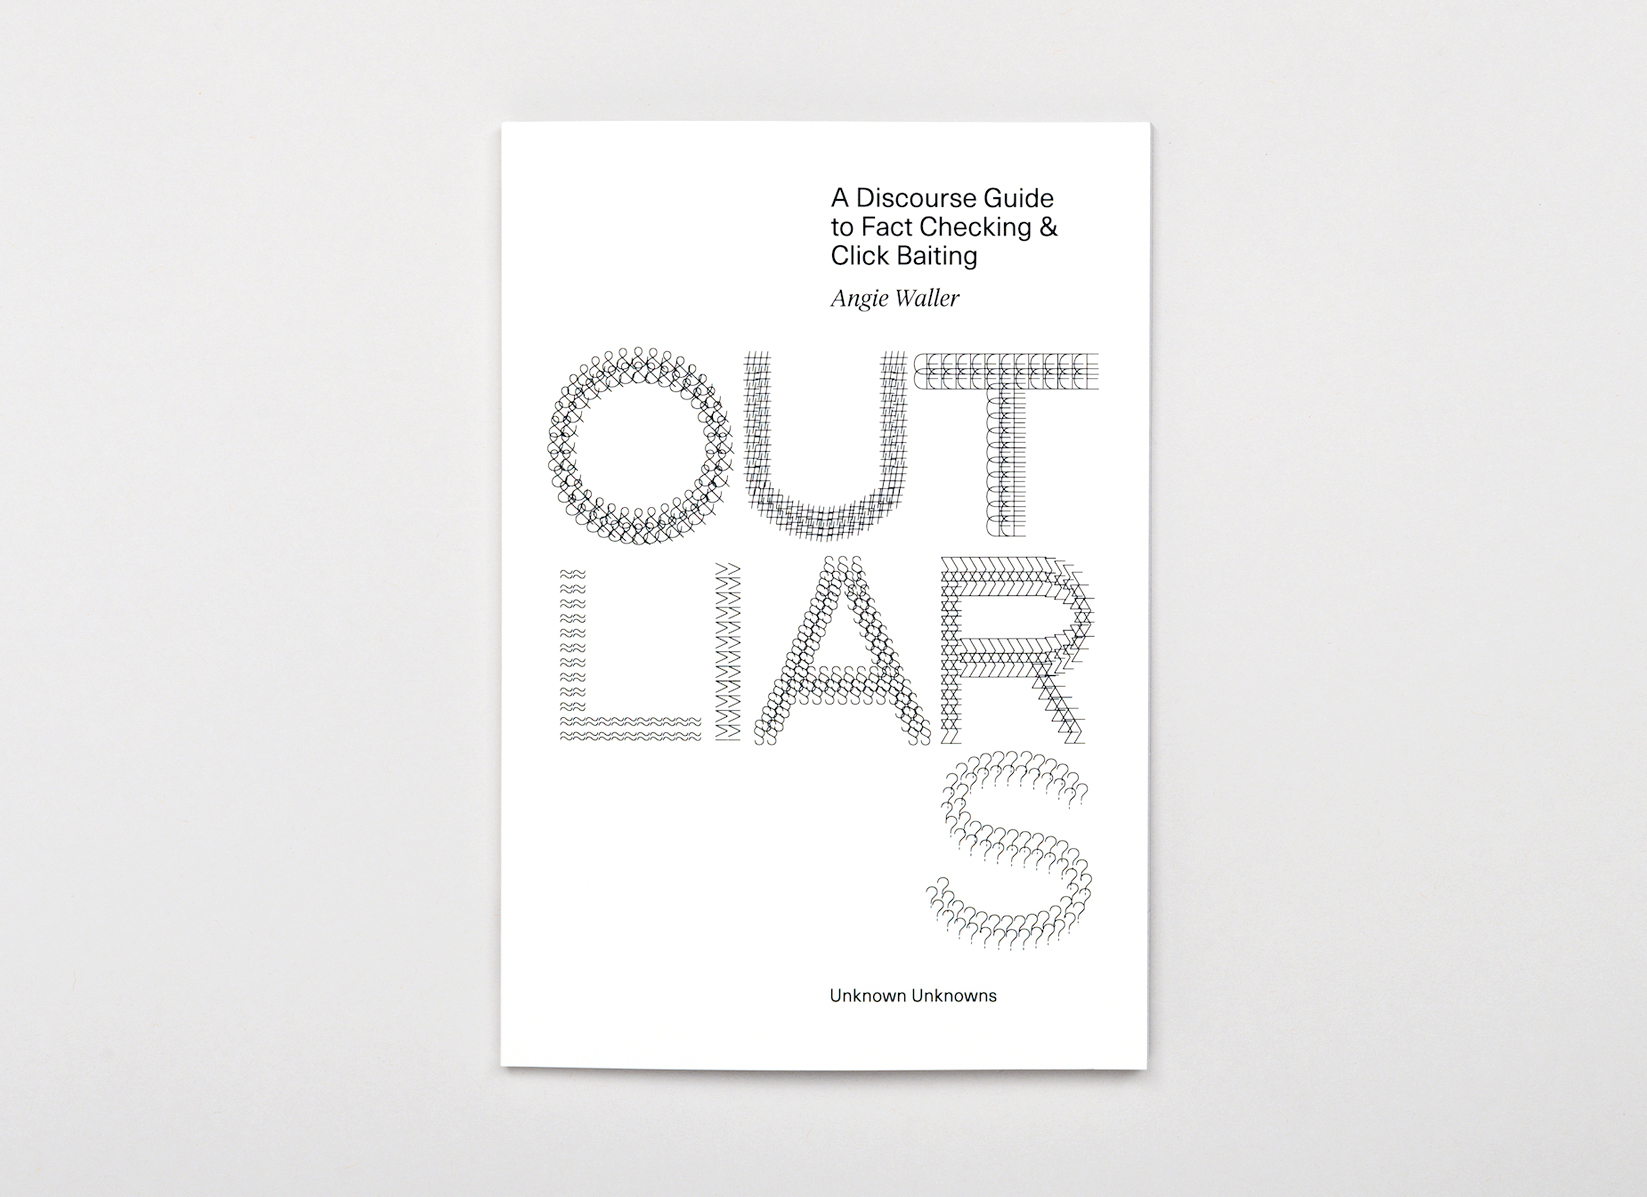 Book cover for Outliars by Angie Waller. Features the title in ascii characters on white background.